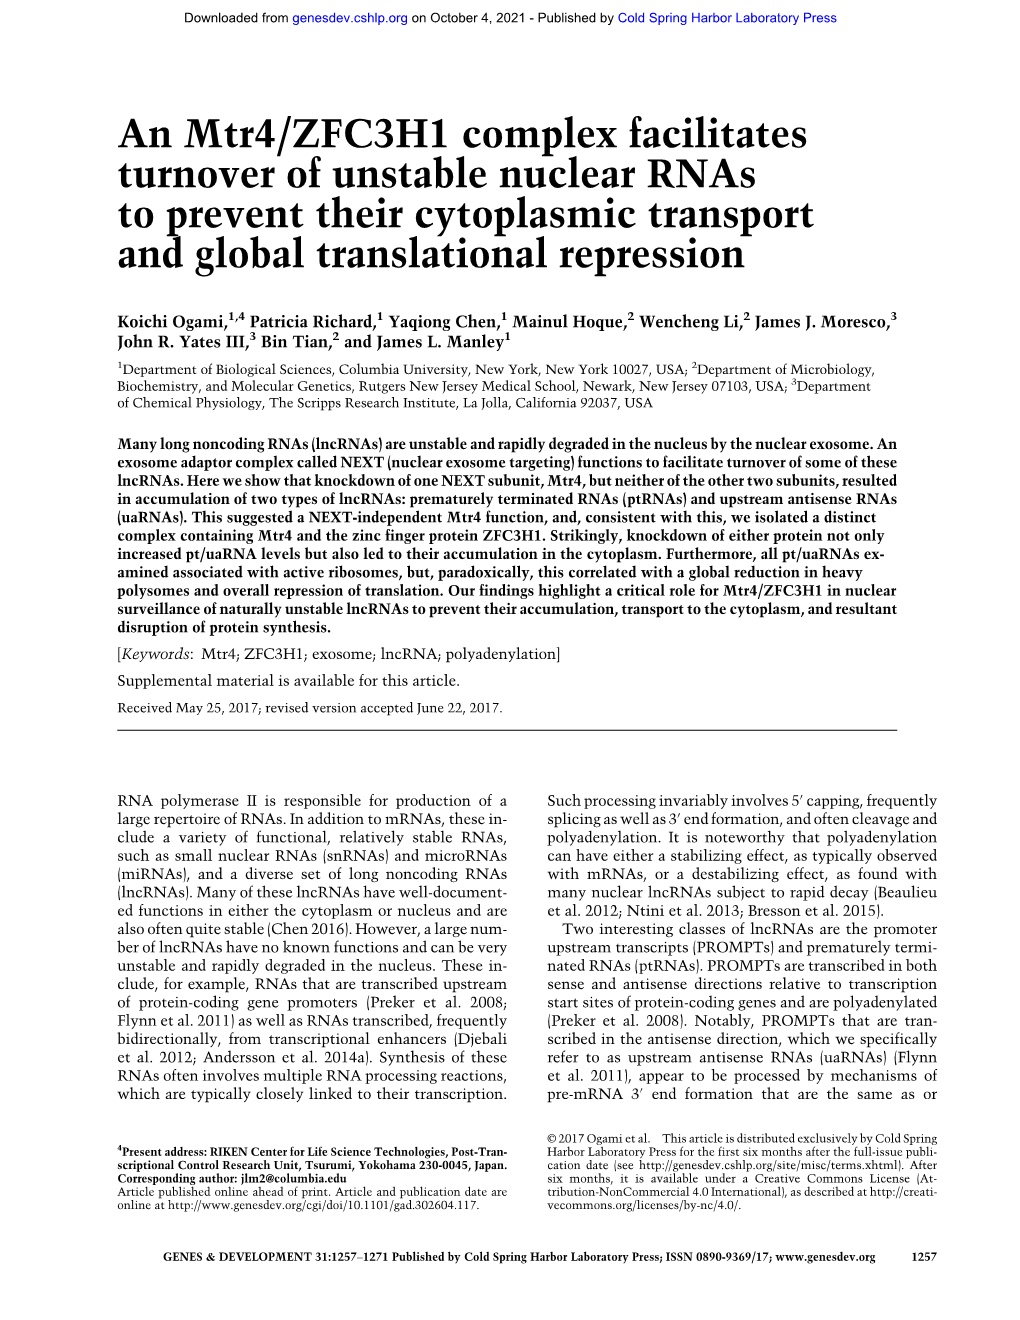 An Mtr4/ZFC3H1 Complex Facilitates Turnover of Unstable Nuclear Rnas to Prevent Their Cytoplasmic Transport and Global Translational Repression